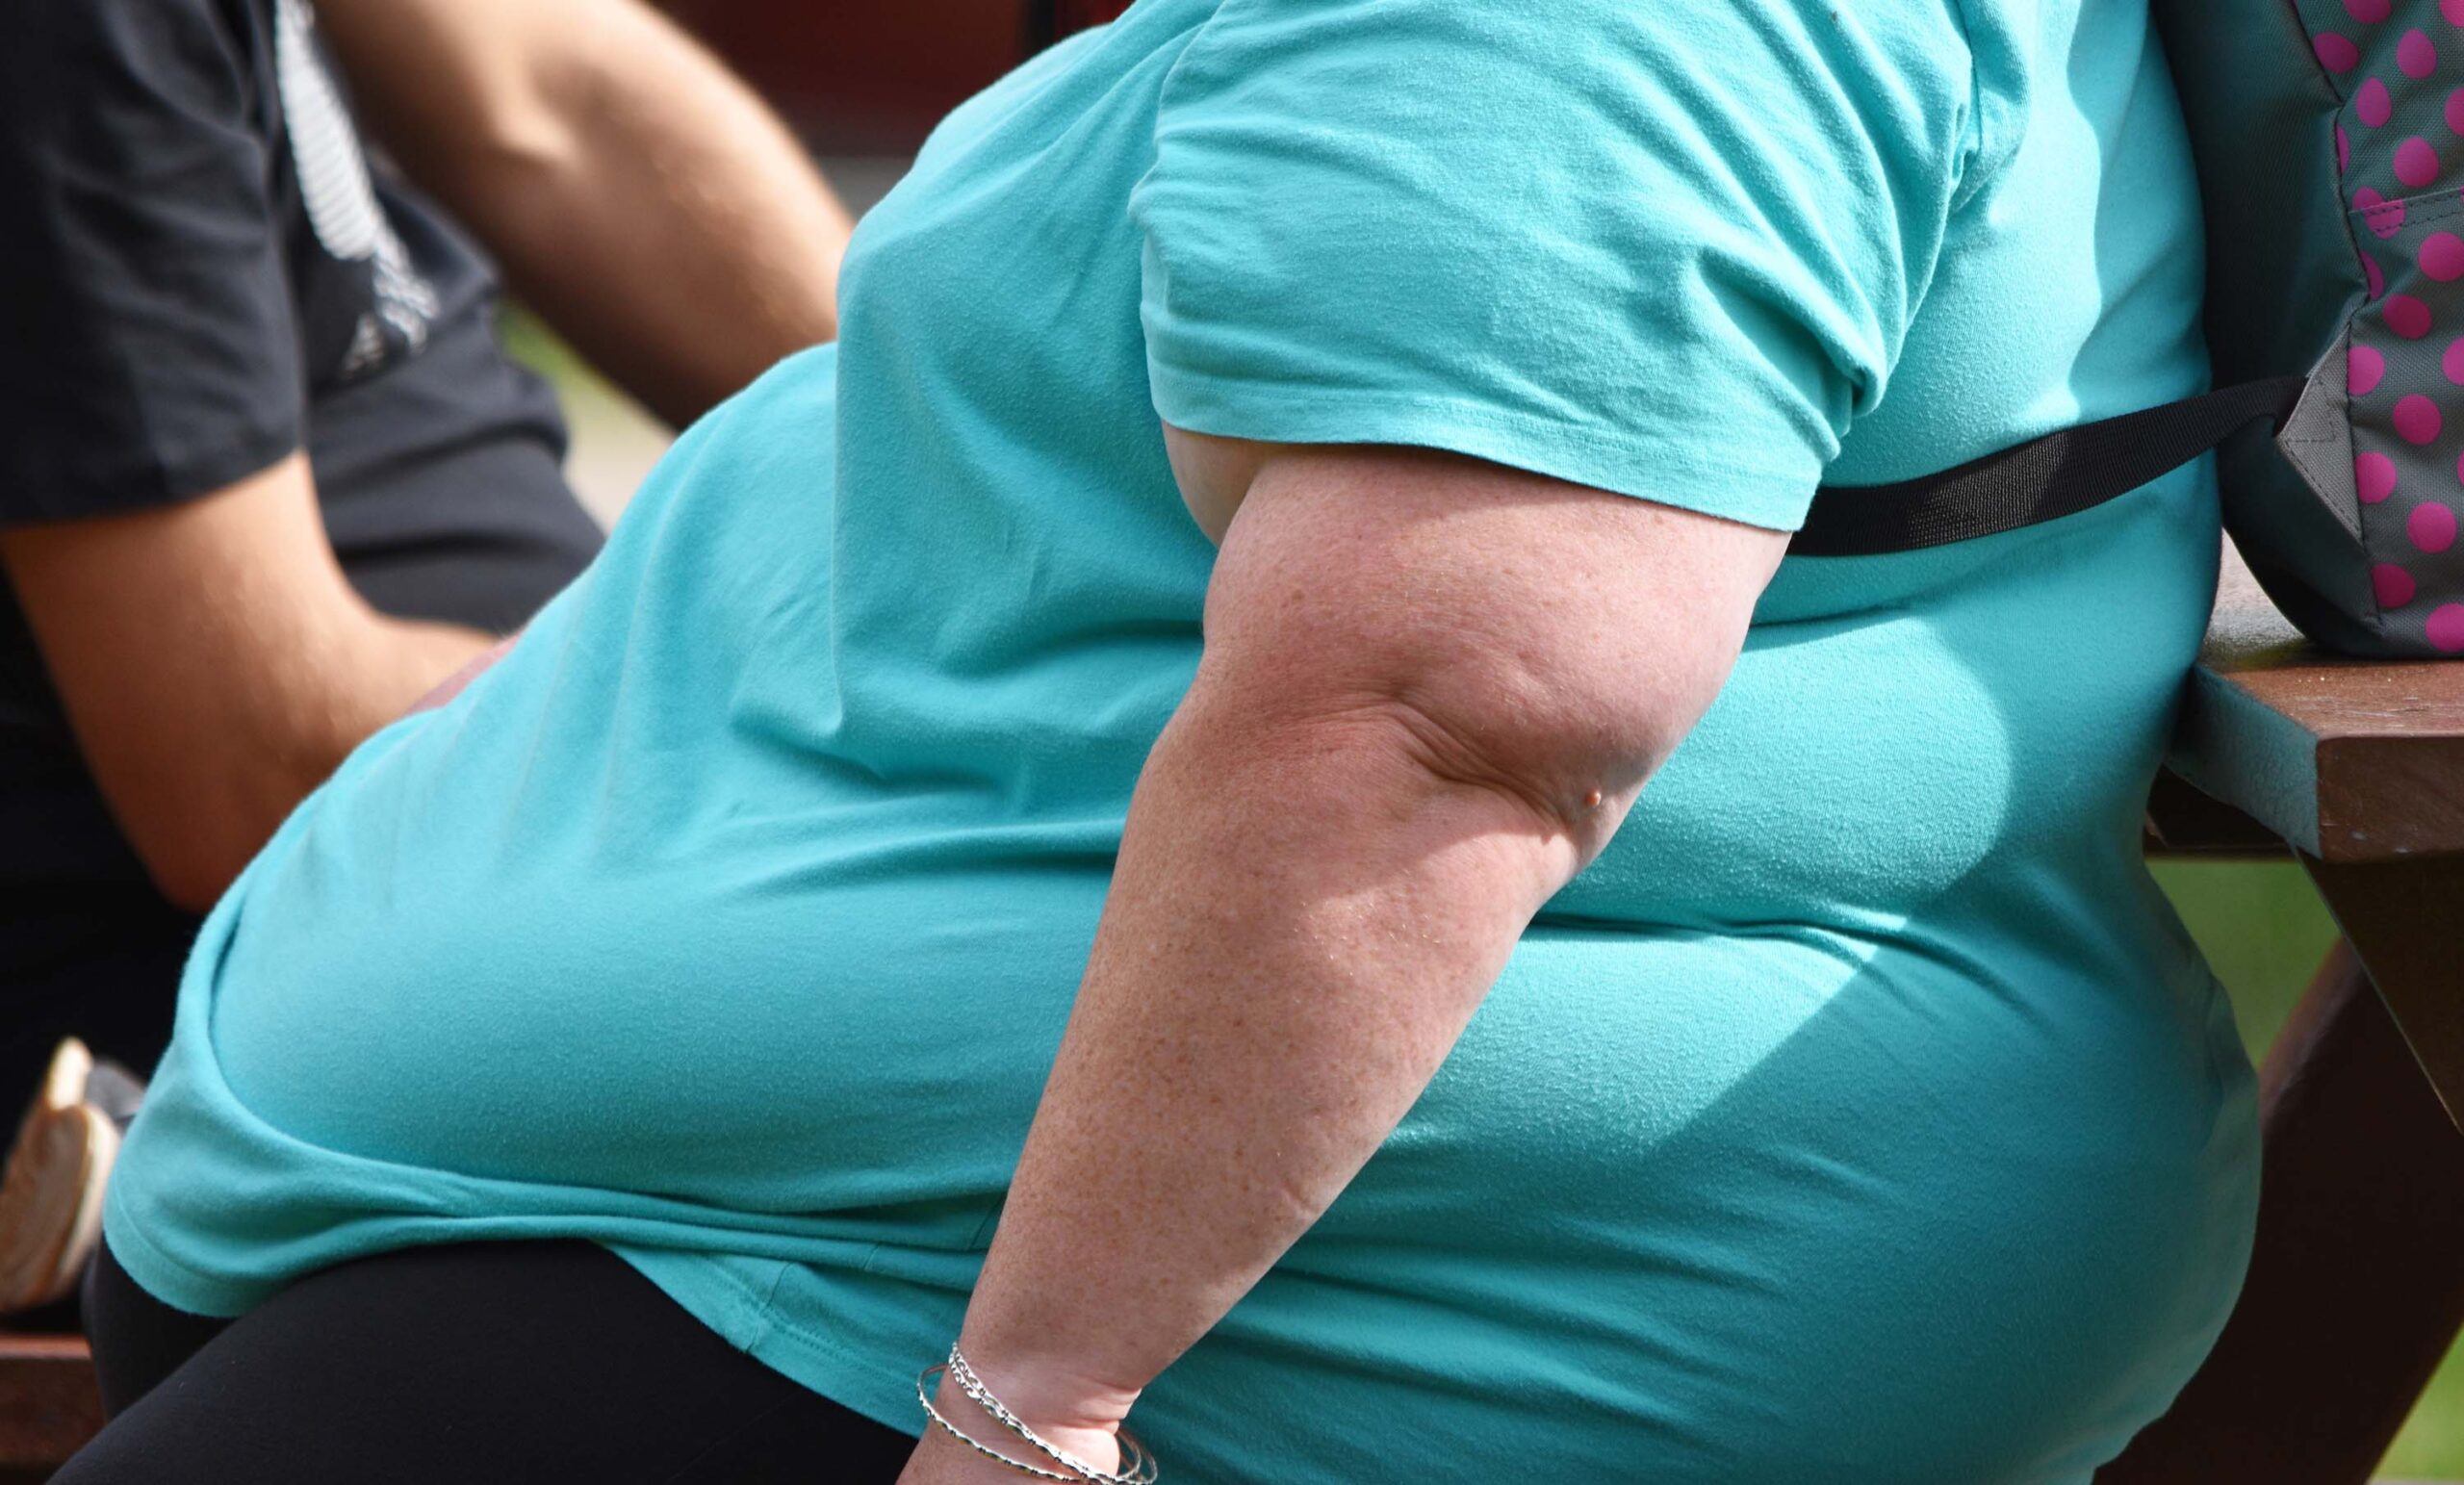 WHO: Over One Billion People Globally Afflicted with Obesity